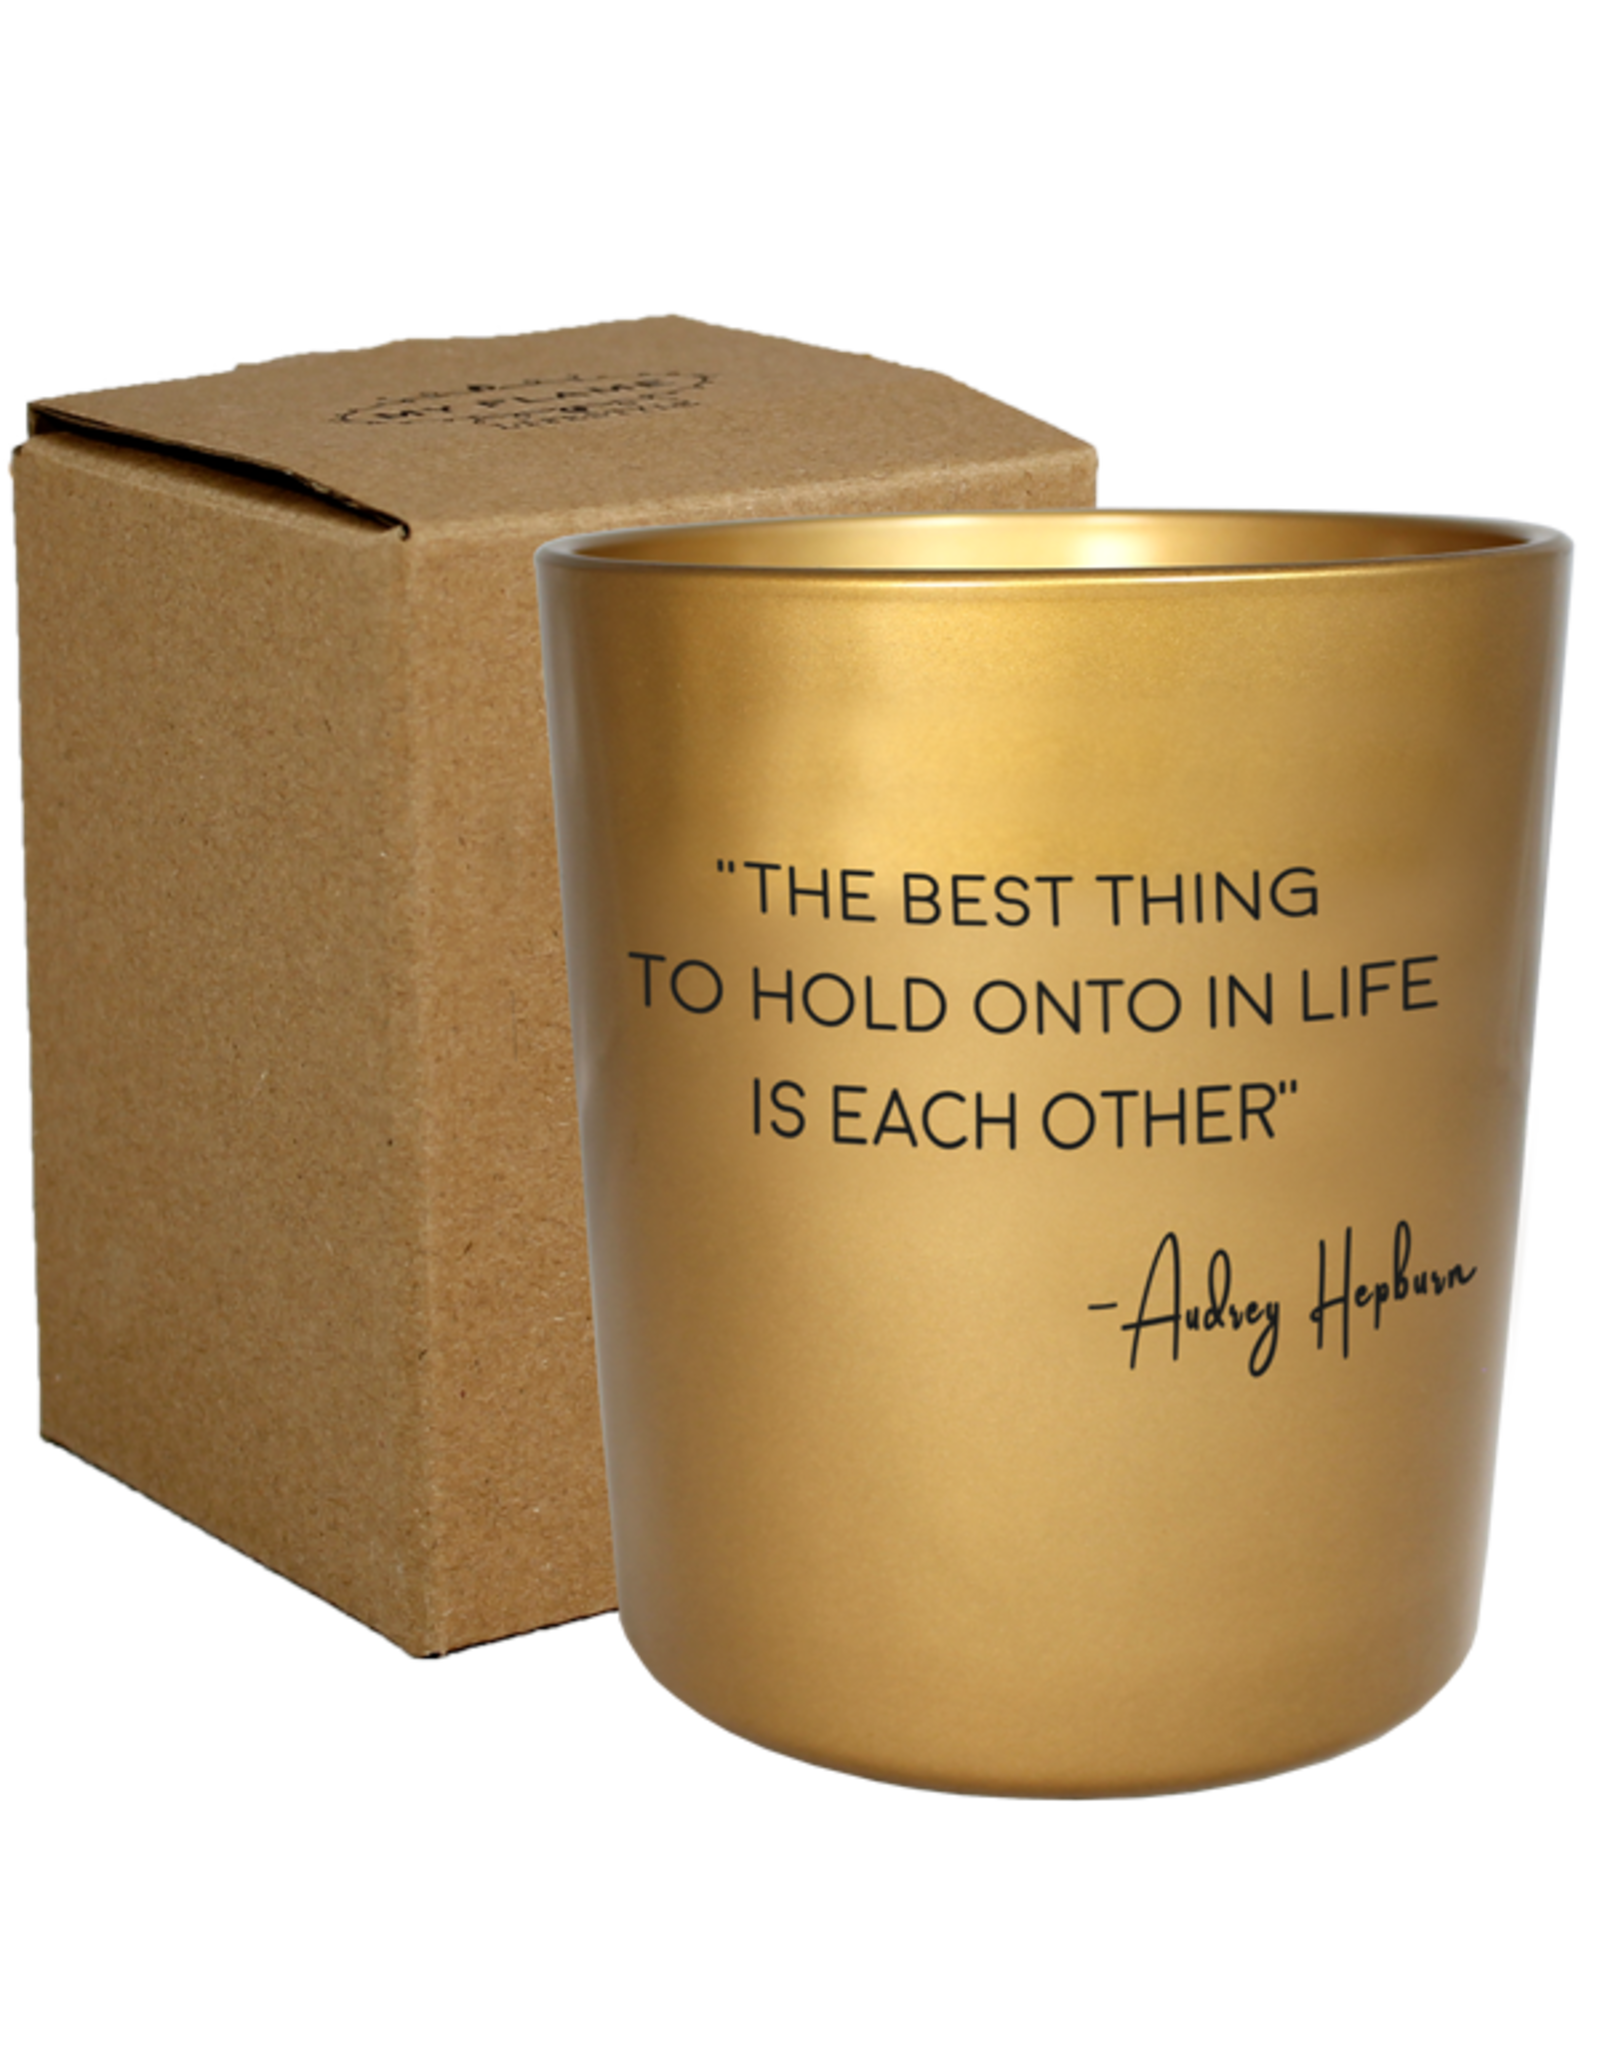 My flame Lifestyle Sojakaars | The best things to hold onto in life is each other  | Audrey Hepburn | My Flame